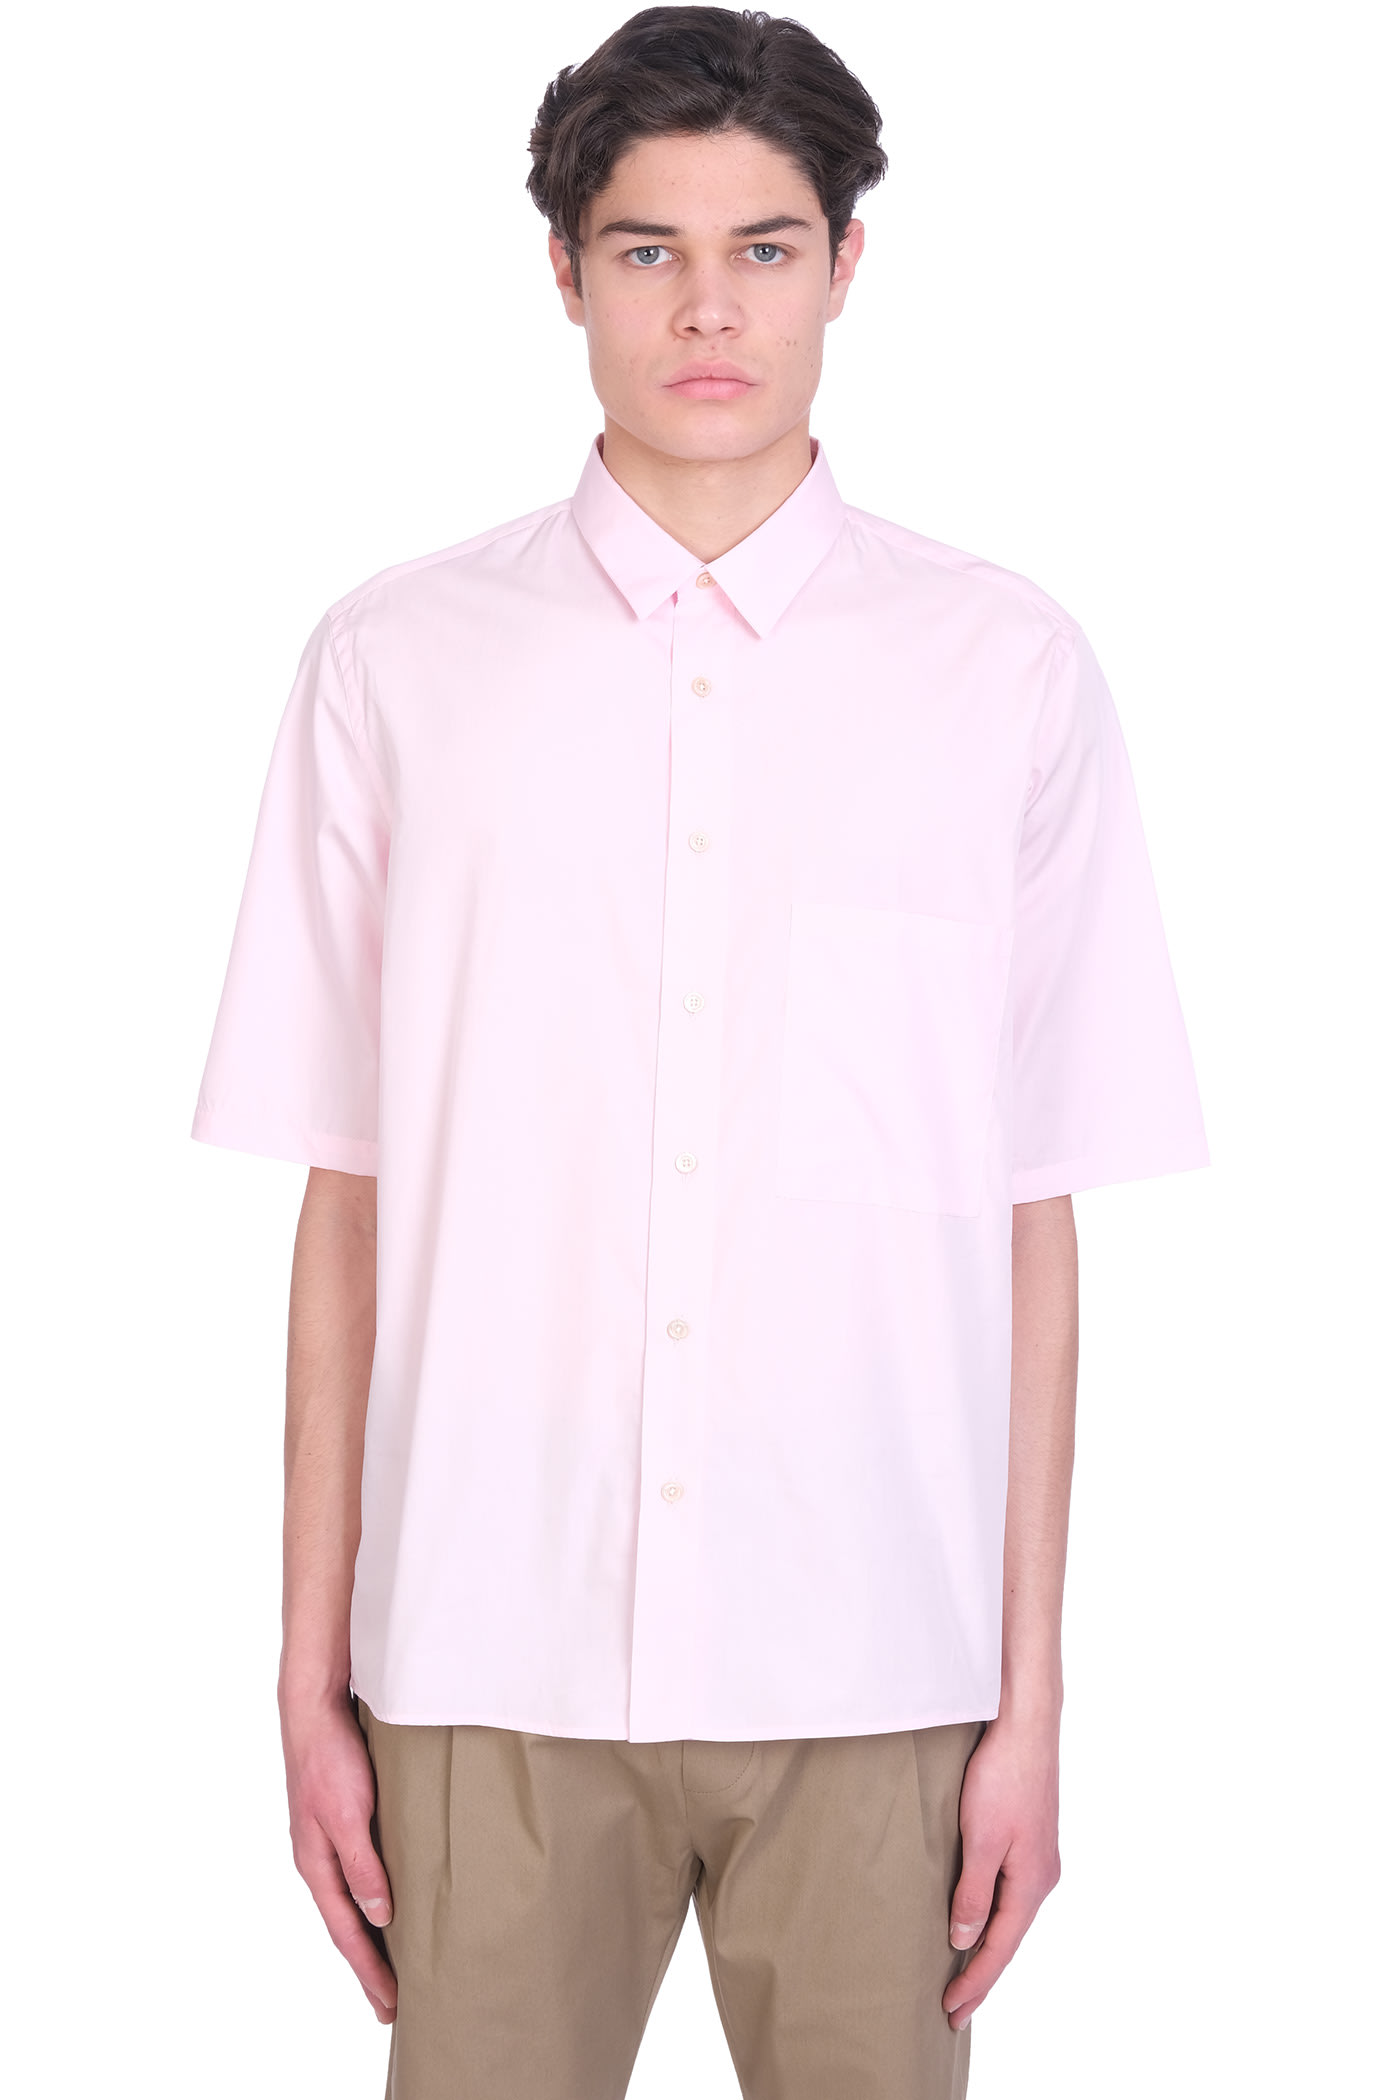 Low Brand Shirt In Rose-pink Cotton